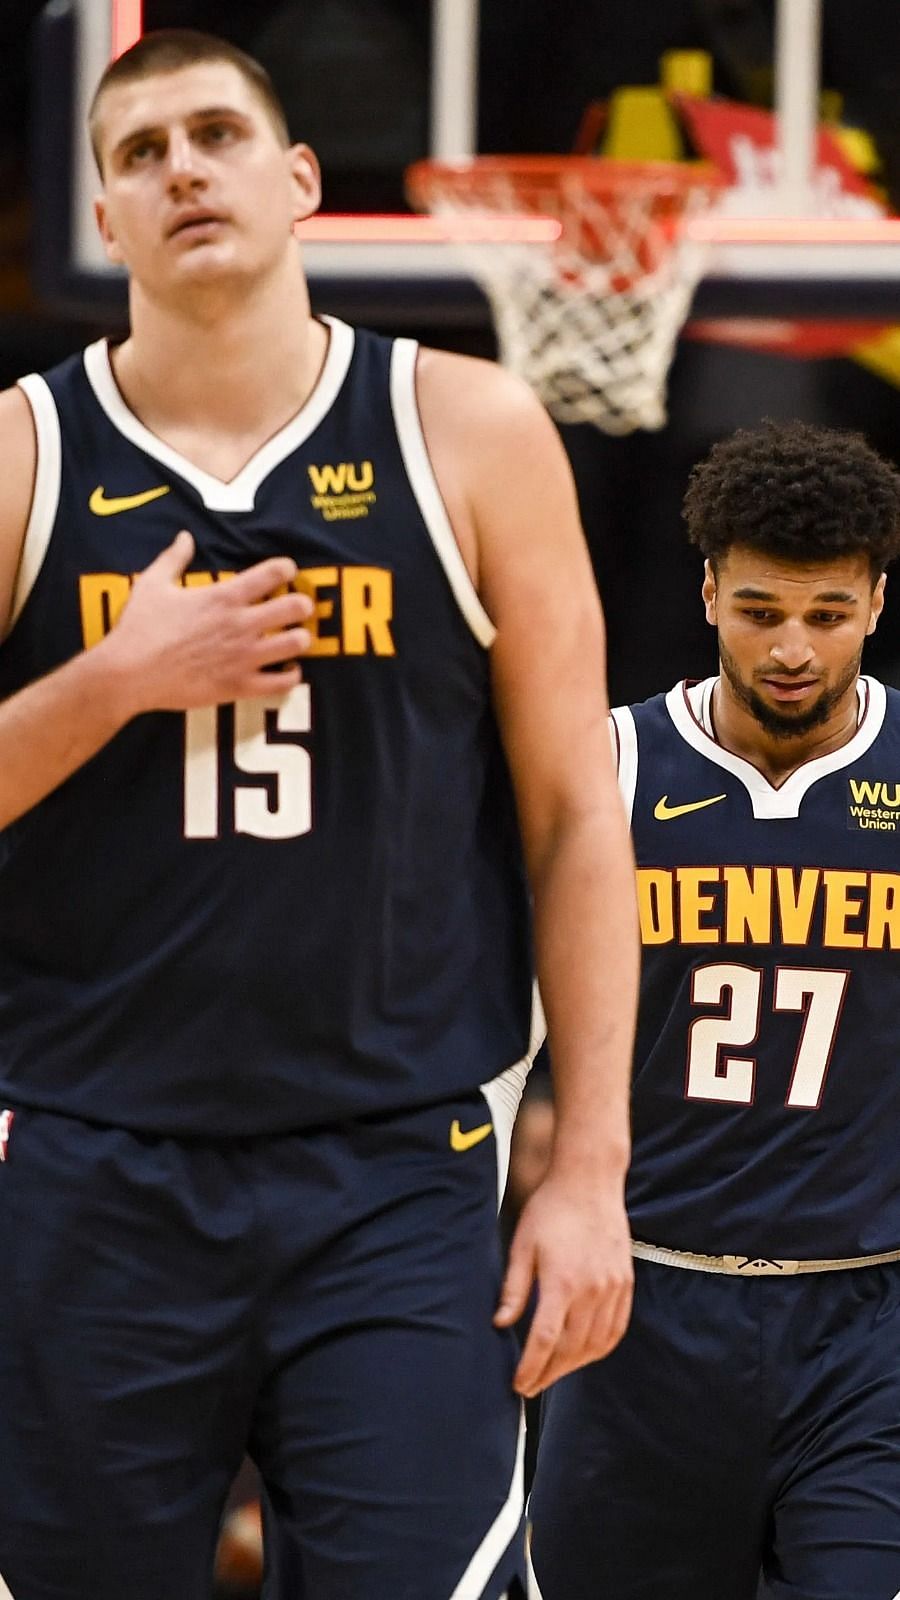 Denver Nuggets 2020 21 Nba Season Preview Prediction Key Acquisitions Complete Roster And Starting 5